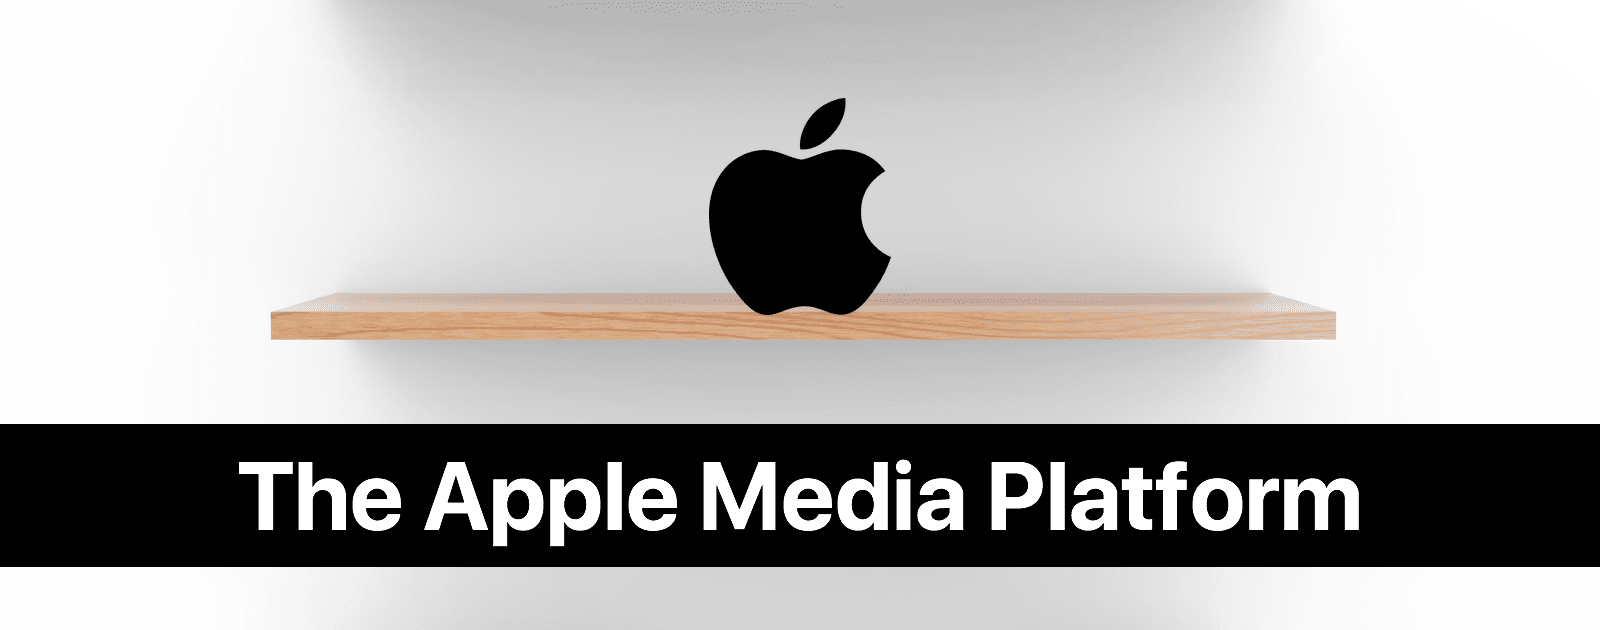 Grand Unified Theory of the Apple Media Platform